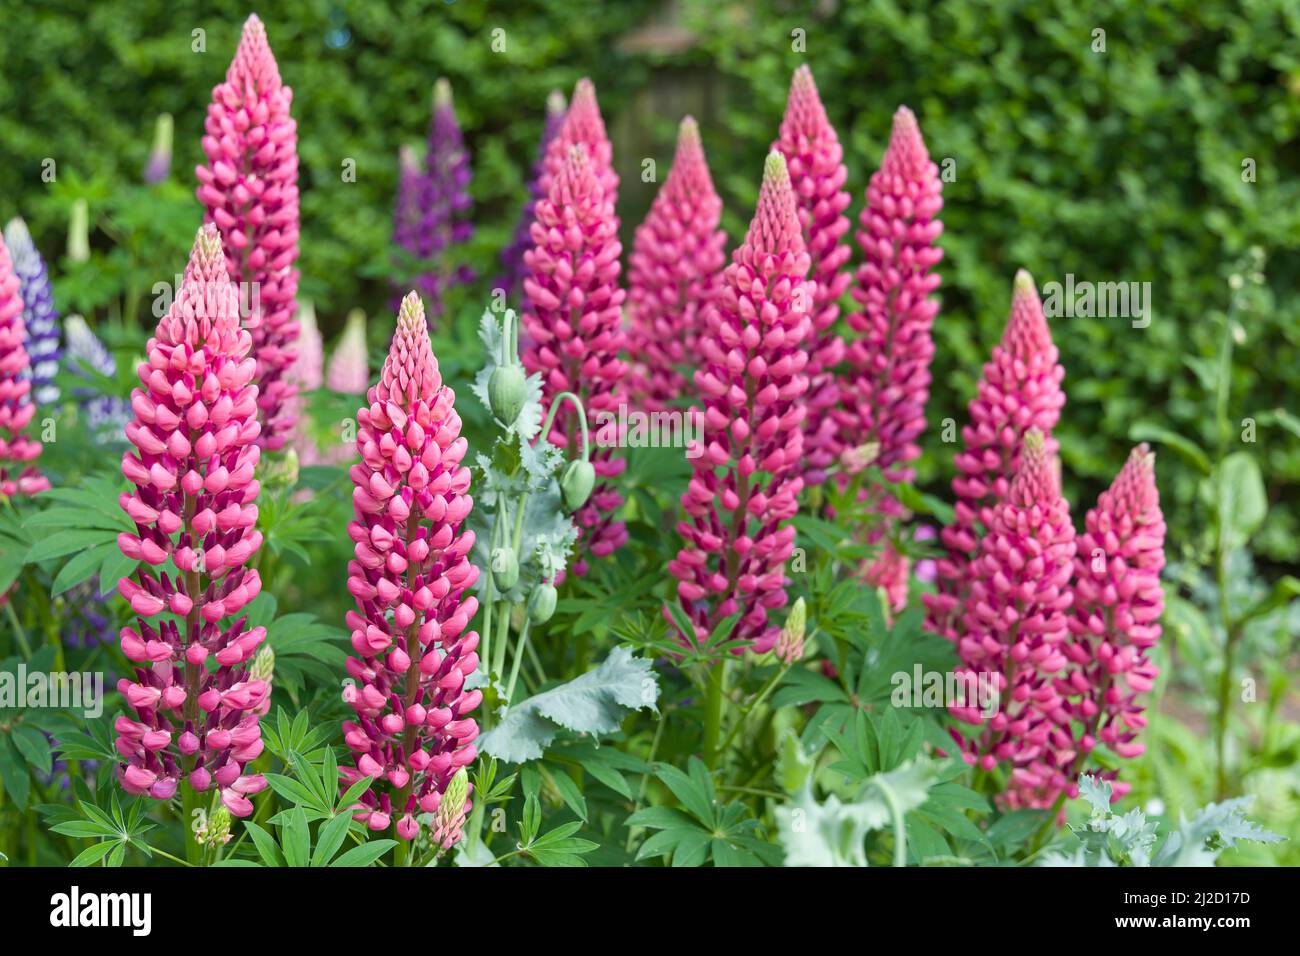 Lupins, lupin plant (lupinus) with pink flowers growing in a back garden, UK Stock Photo